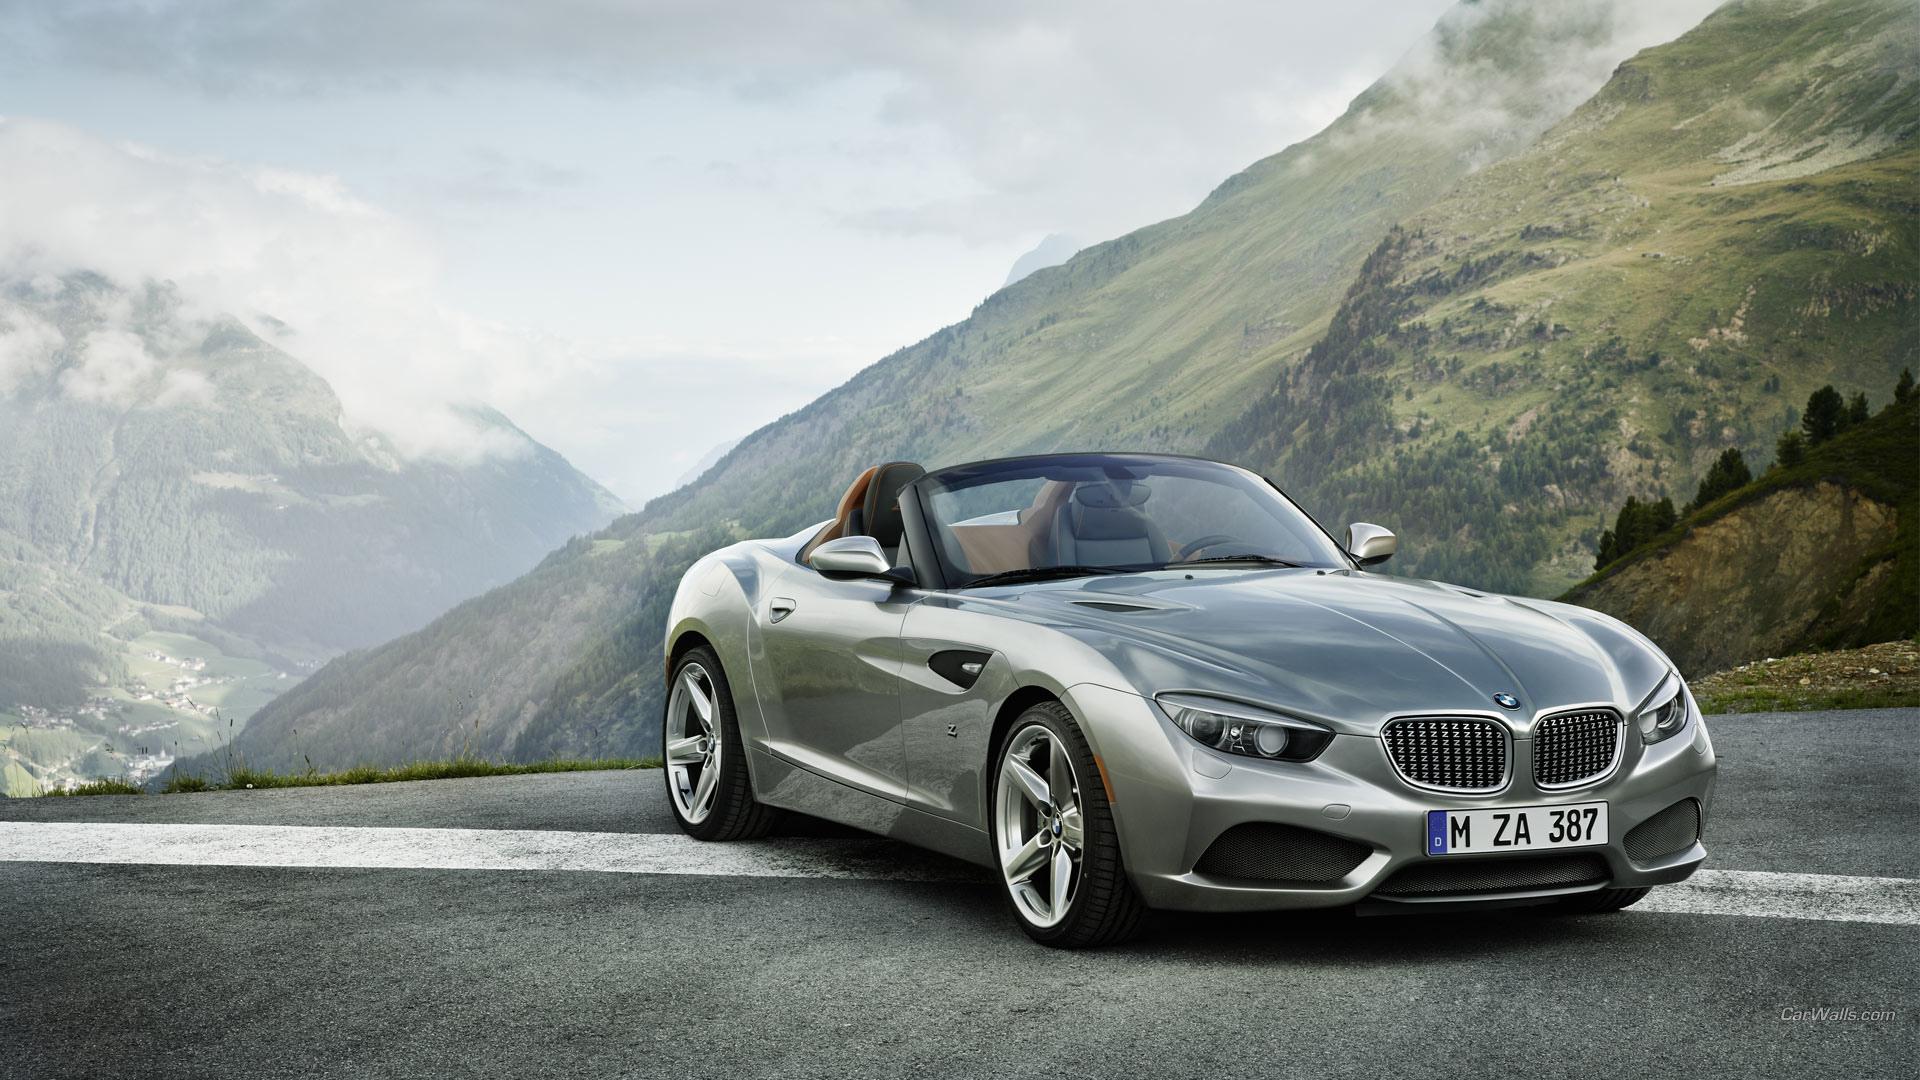 Bmw Zagato Roadster wallpapers HD quality